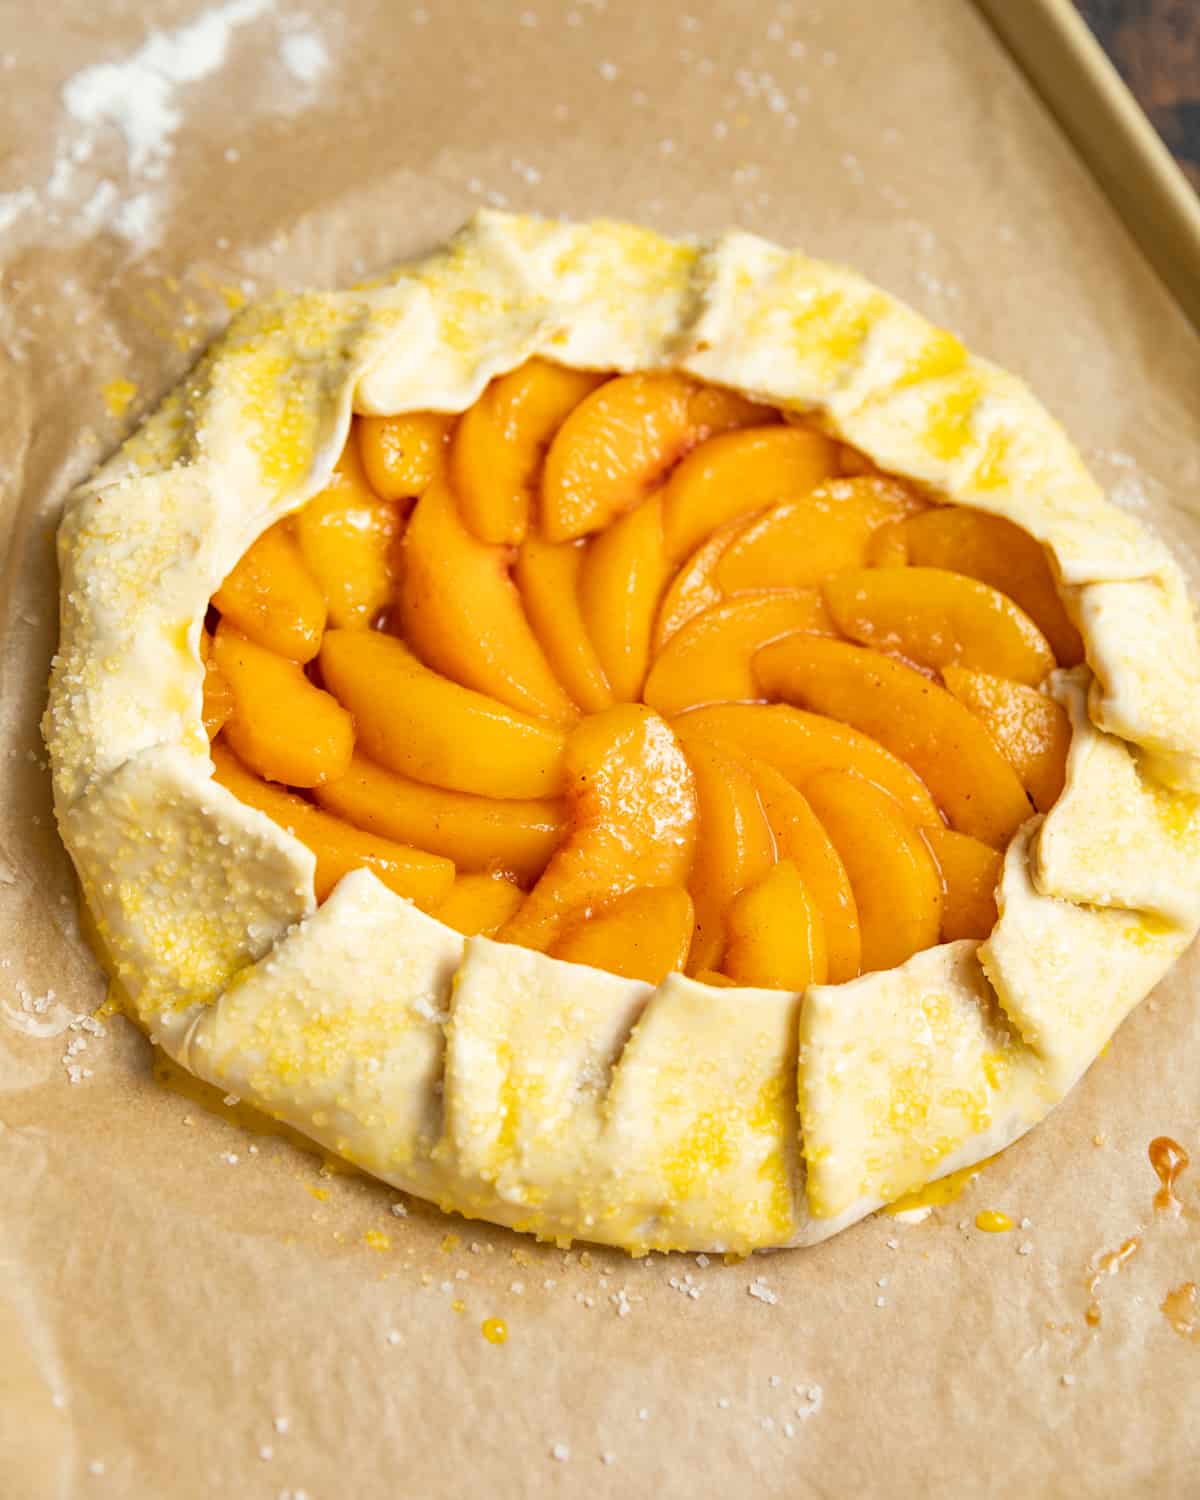 Puff pastry folded into a galette around peaches and brushed with egg wash.